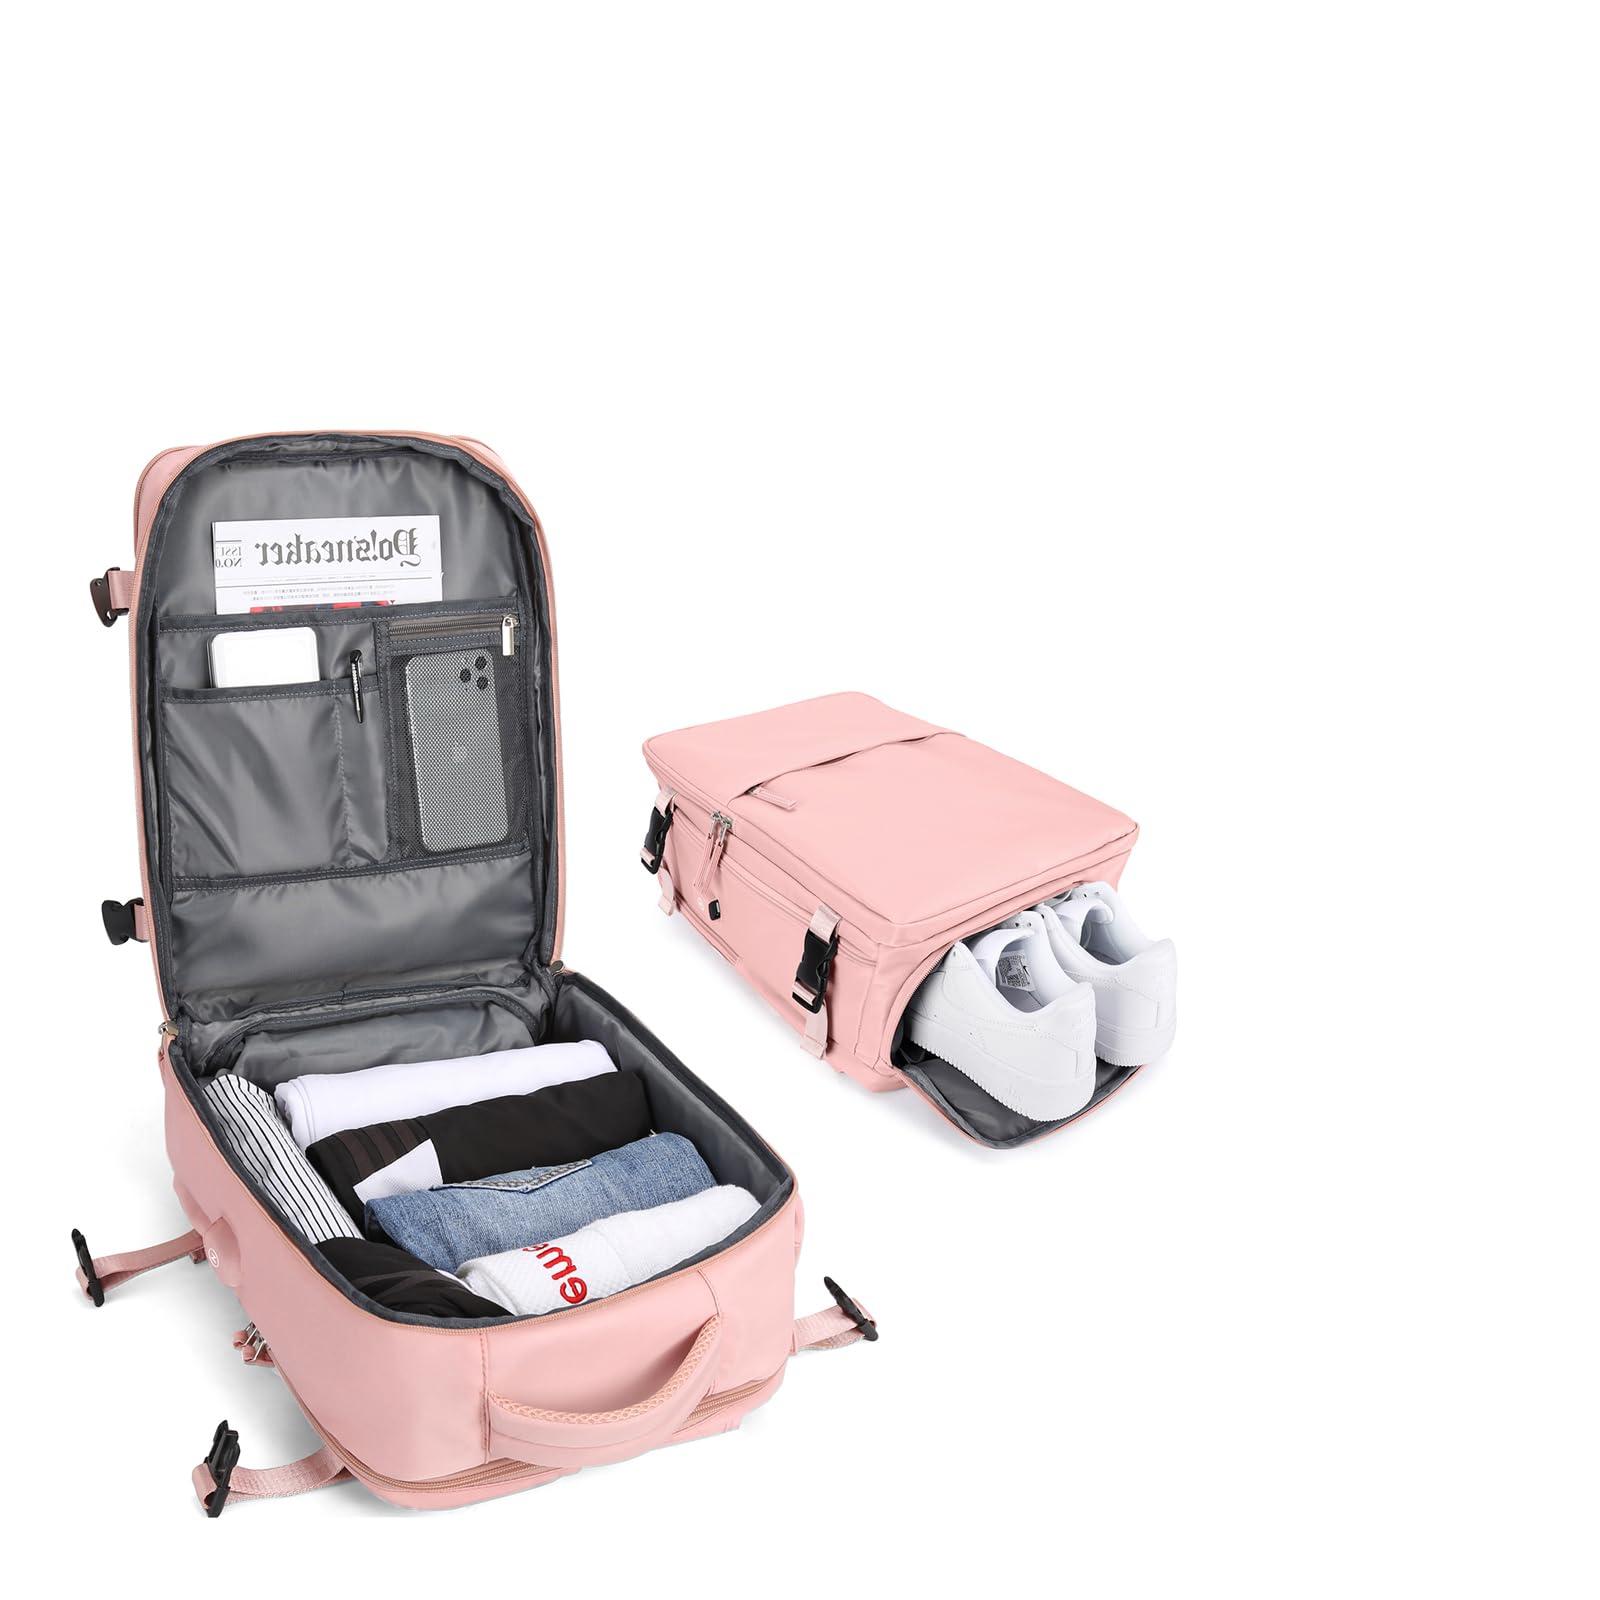 SZSYCN Cabin Bags 40×20×25 for Ryanair Underseat Carry-on Bag - Pink 4